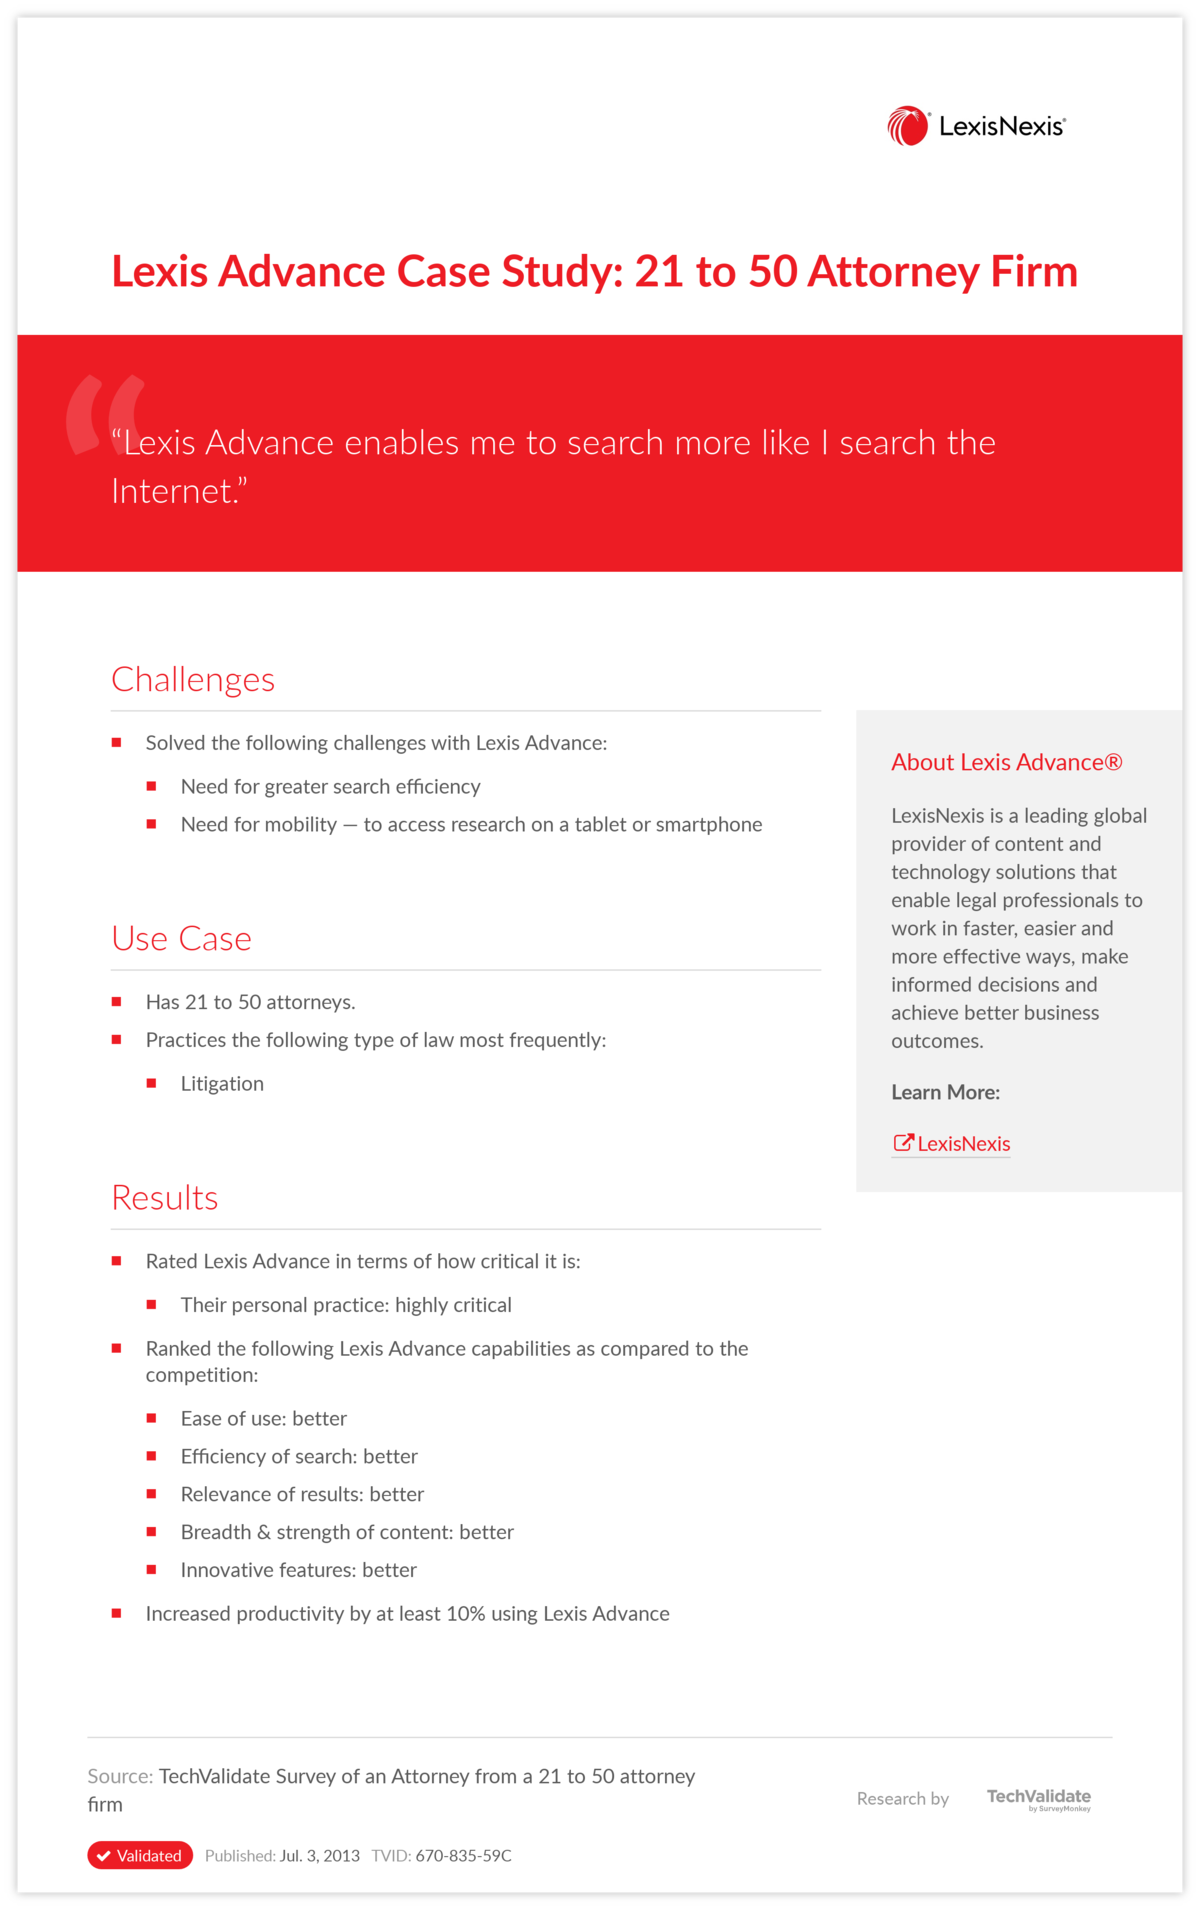 Lexis Advance Case Study: 21 to 50 Attorney Firm